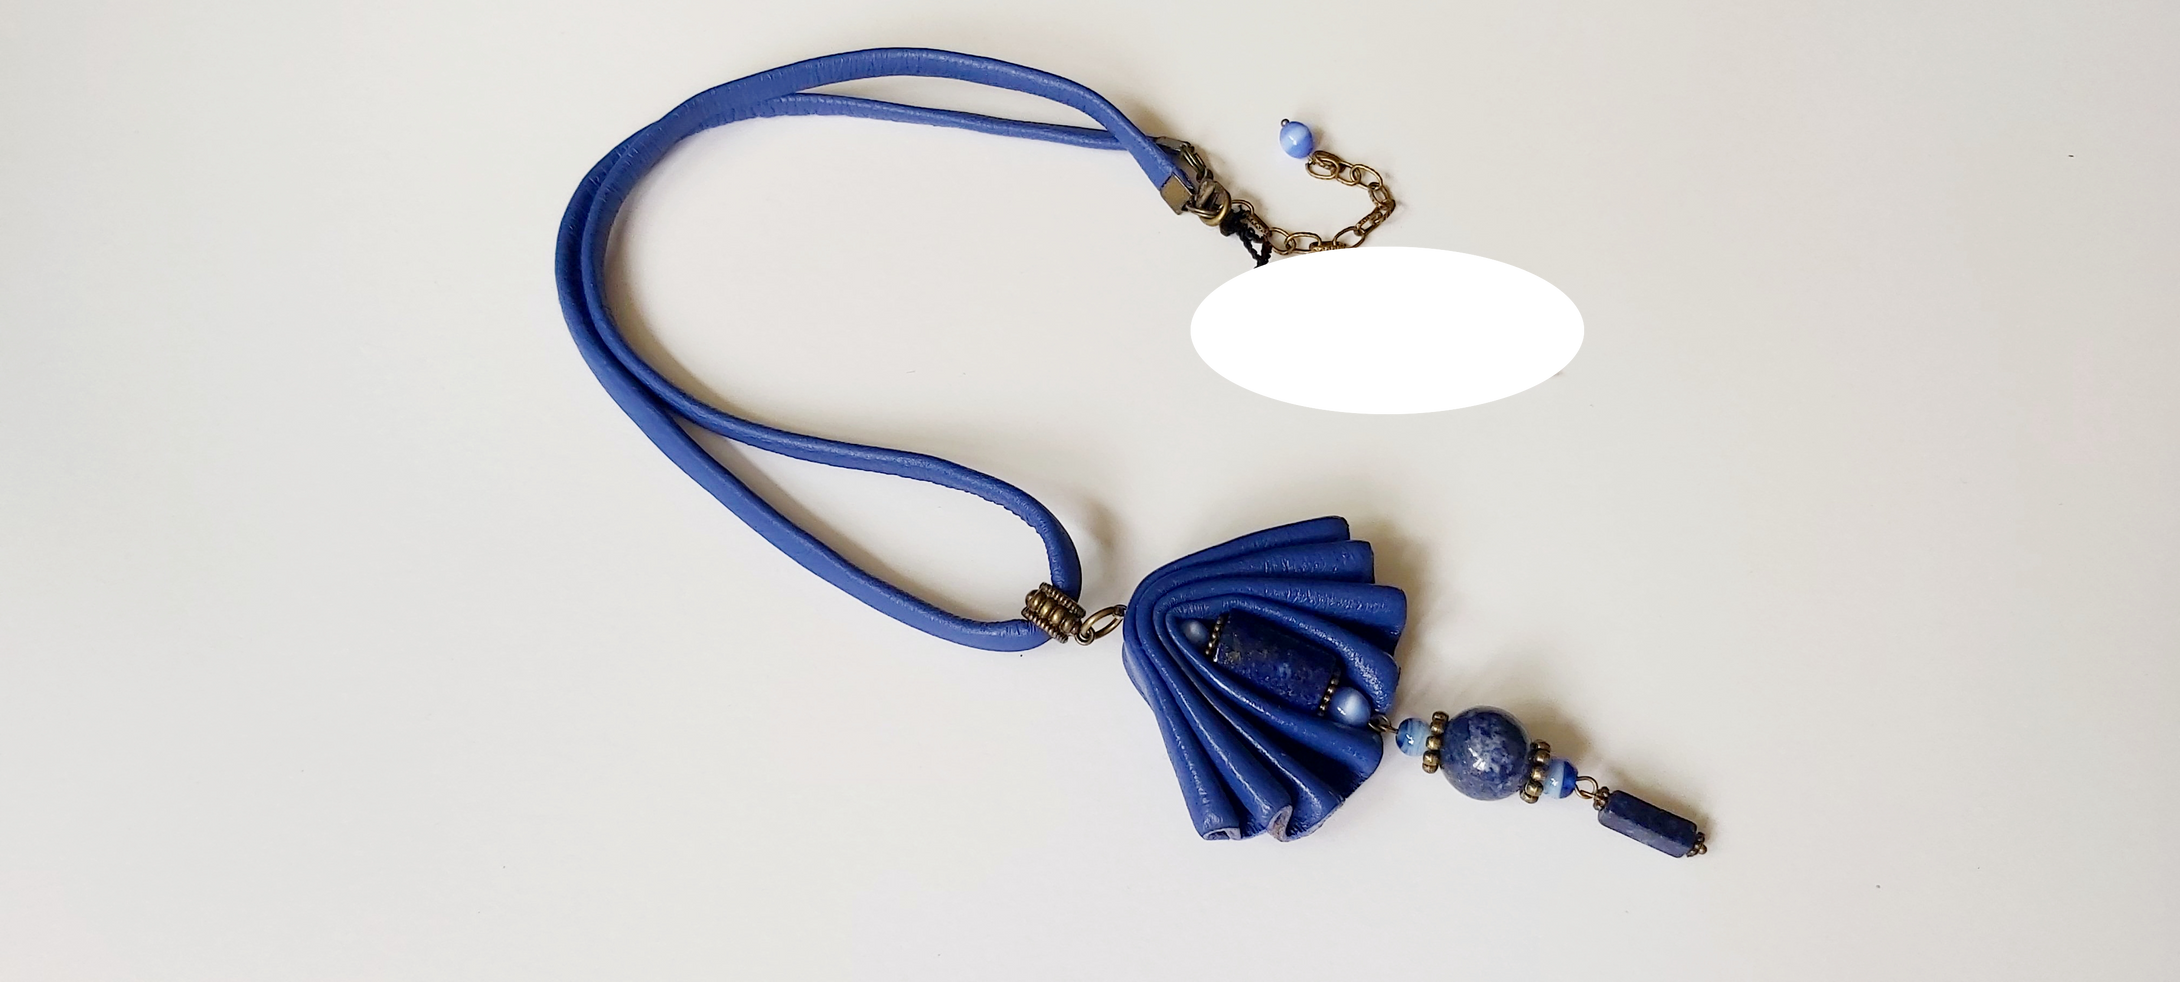 Handmade Leather Necklace with Blue Flowers